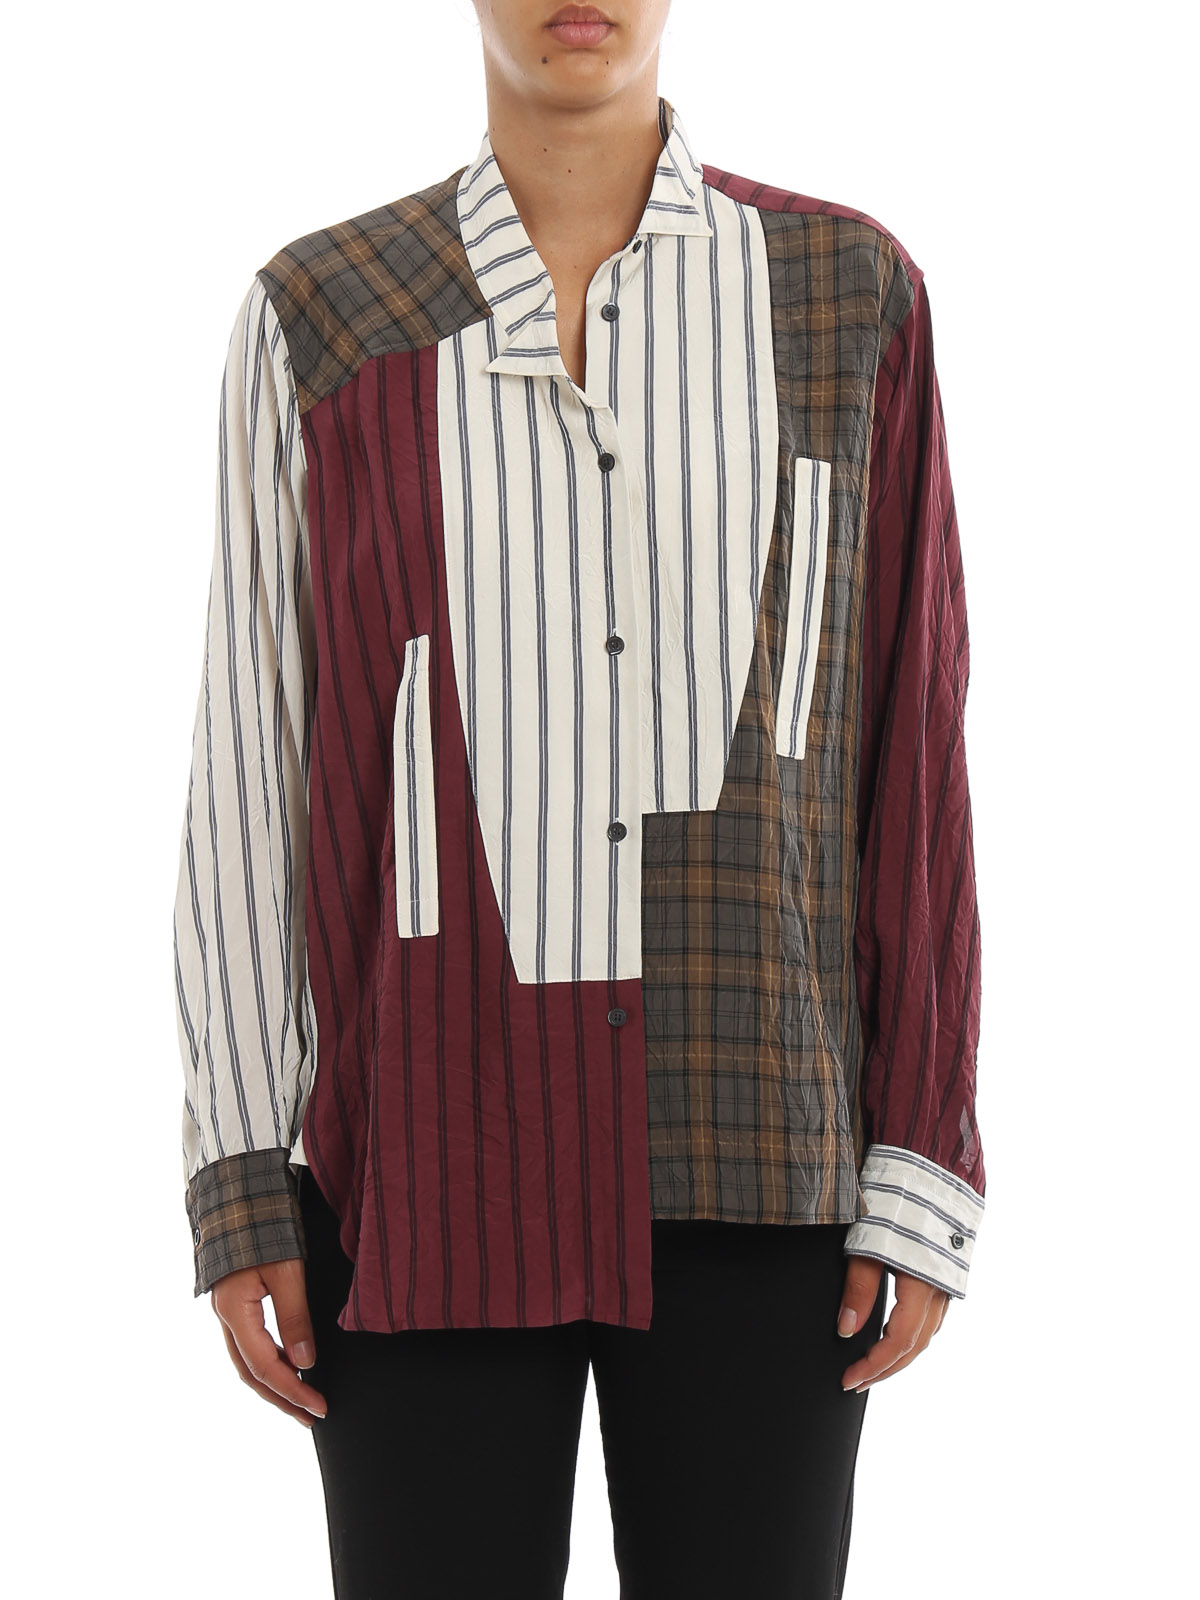 Shirts Loewe - Striped and checked patchwork shirt - S2299221AK9990